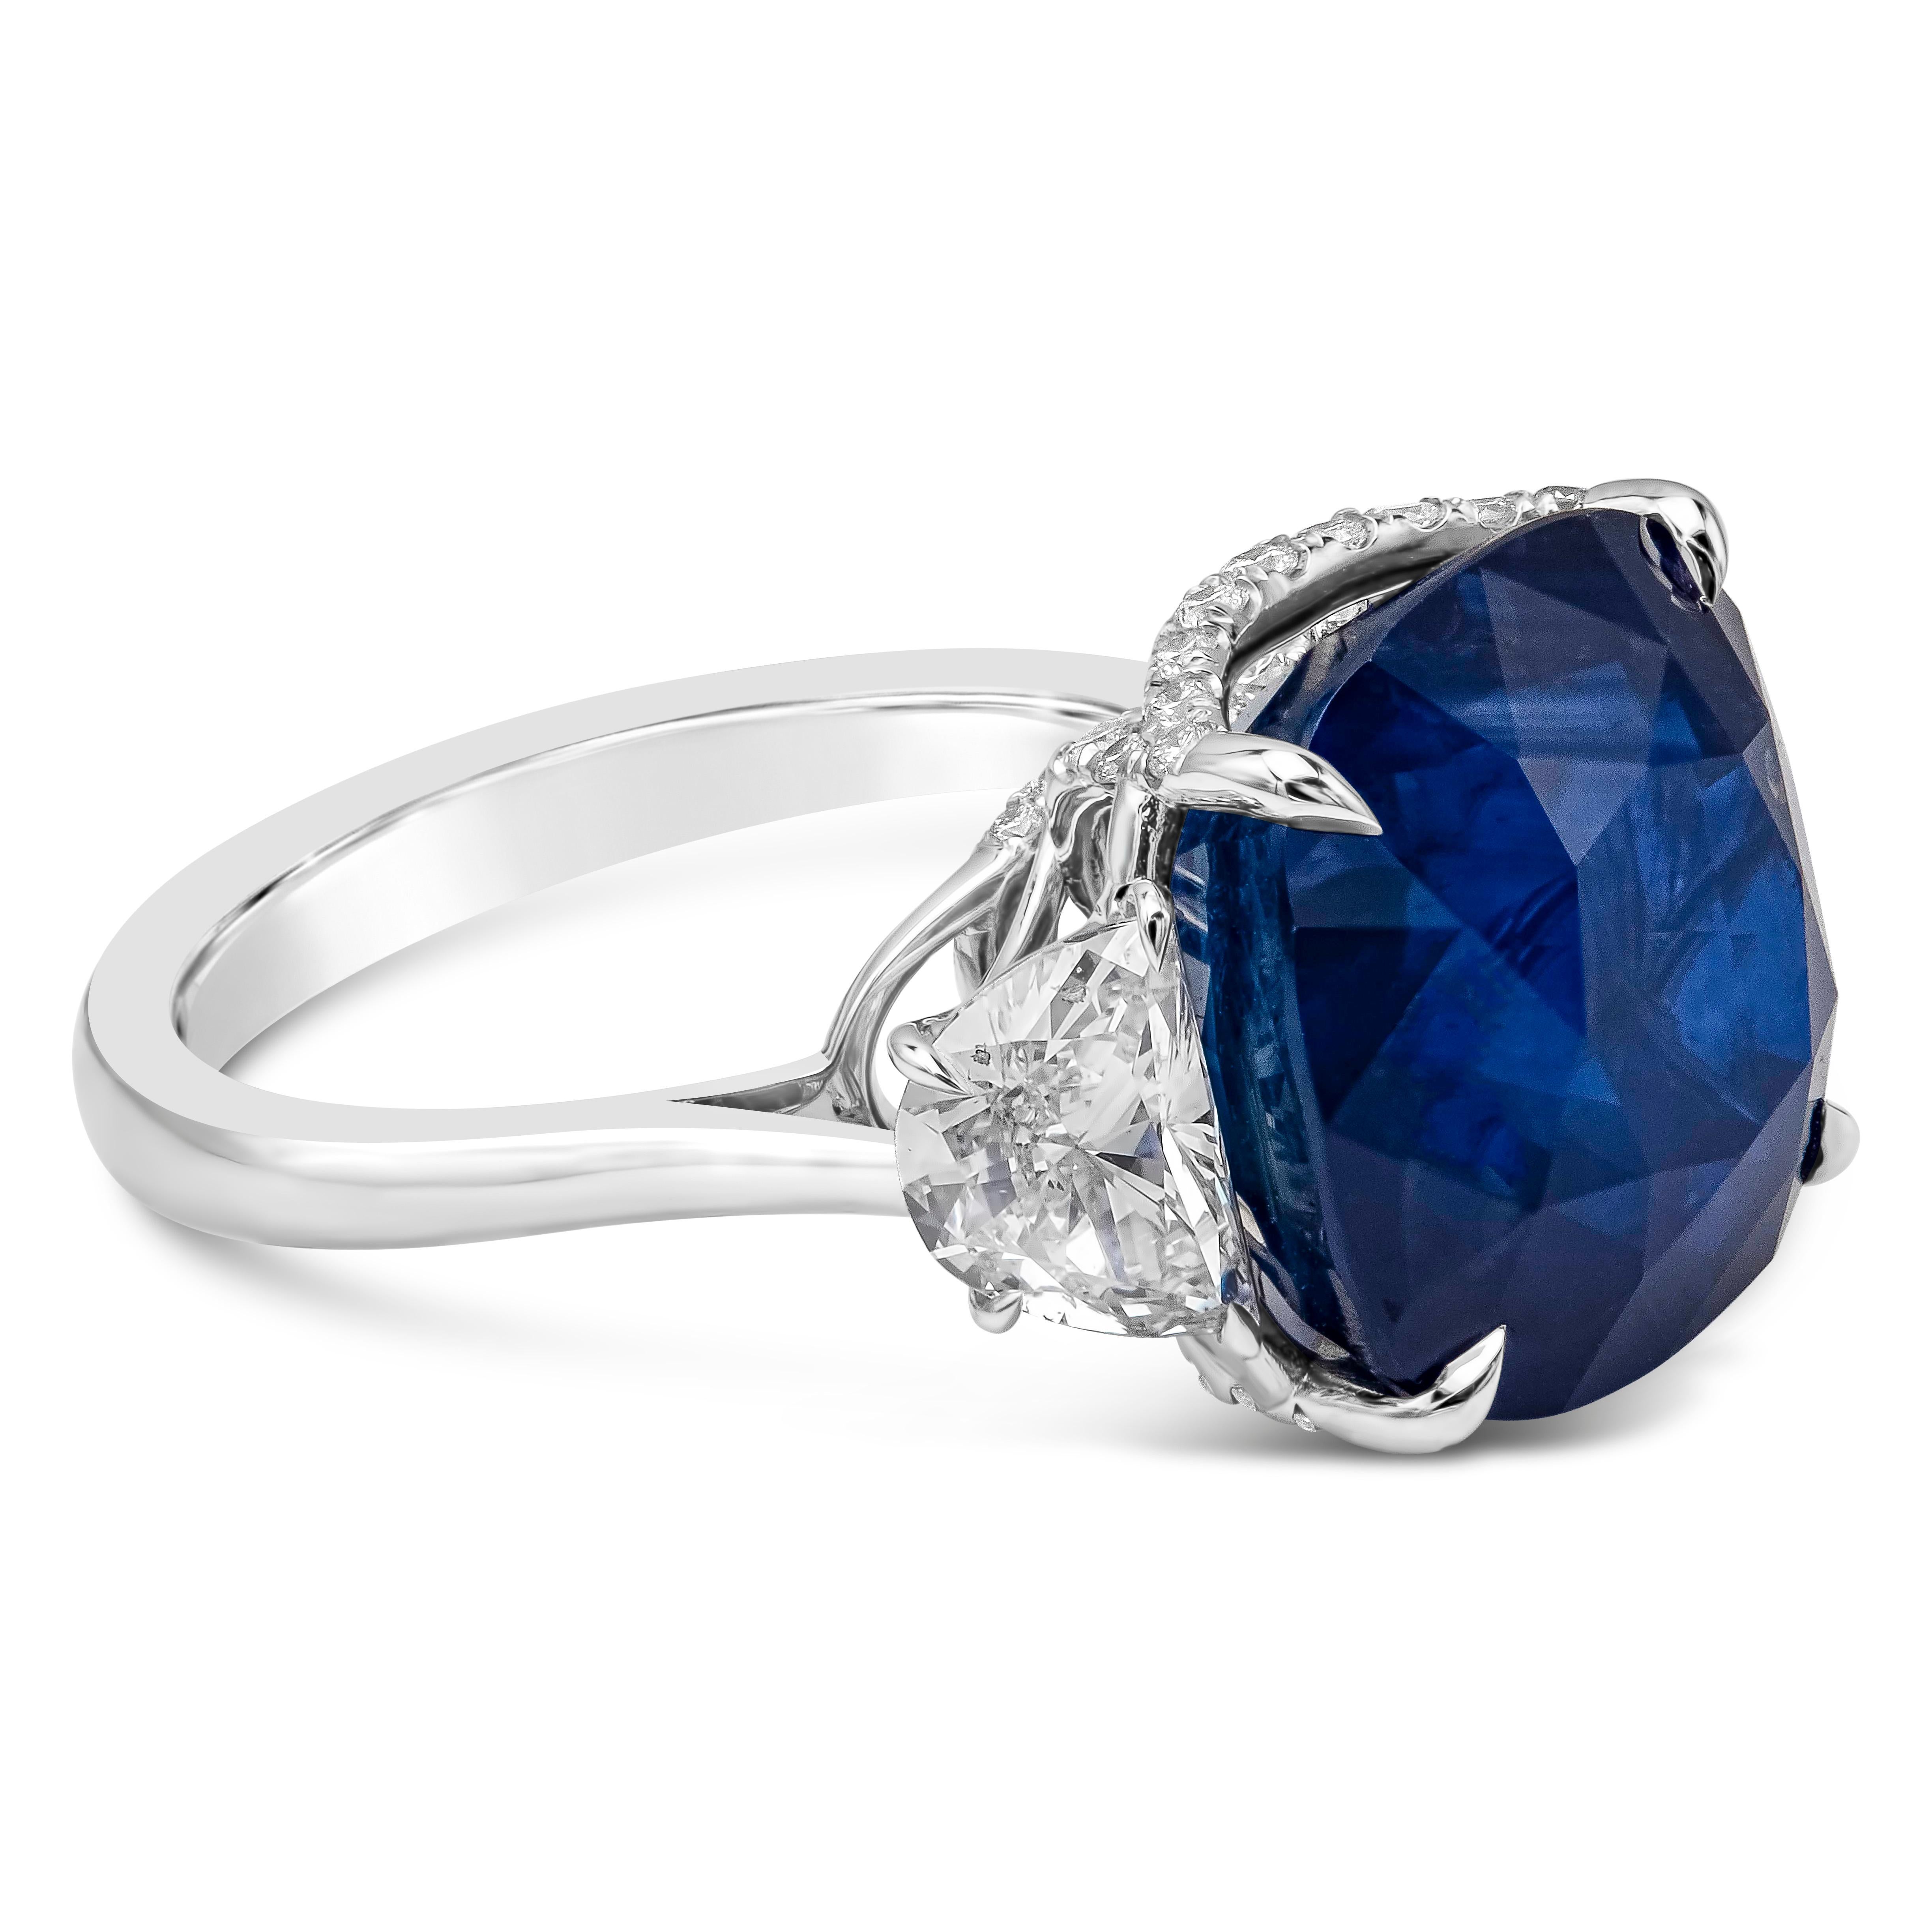 Well crafted three stone engagement ring featuring a beautiful and vibrant 15.68 carat cushion cut sapphire gemstone certified by C. Dunaigre as intense blue color, Ceylon/ Sri Lanka origin. Flanking the center gemstone are half moon diamonds